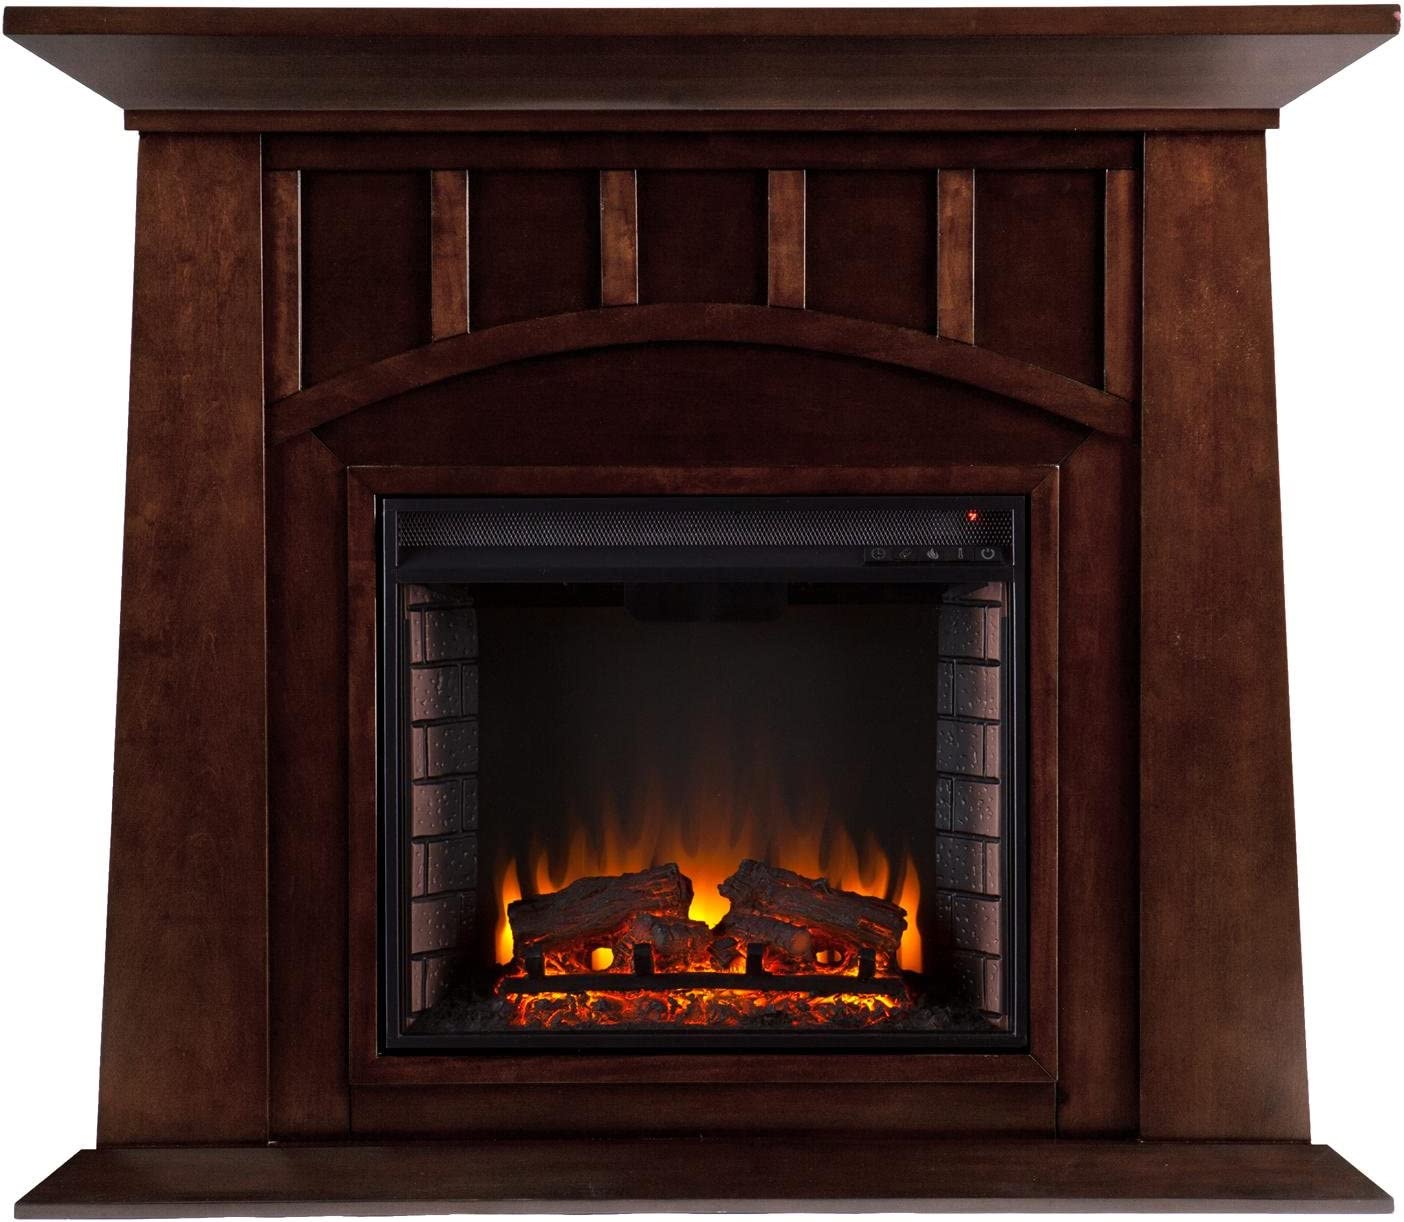 Southern Enterprises Lowery Electric Fireplace in Espresso